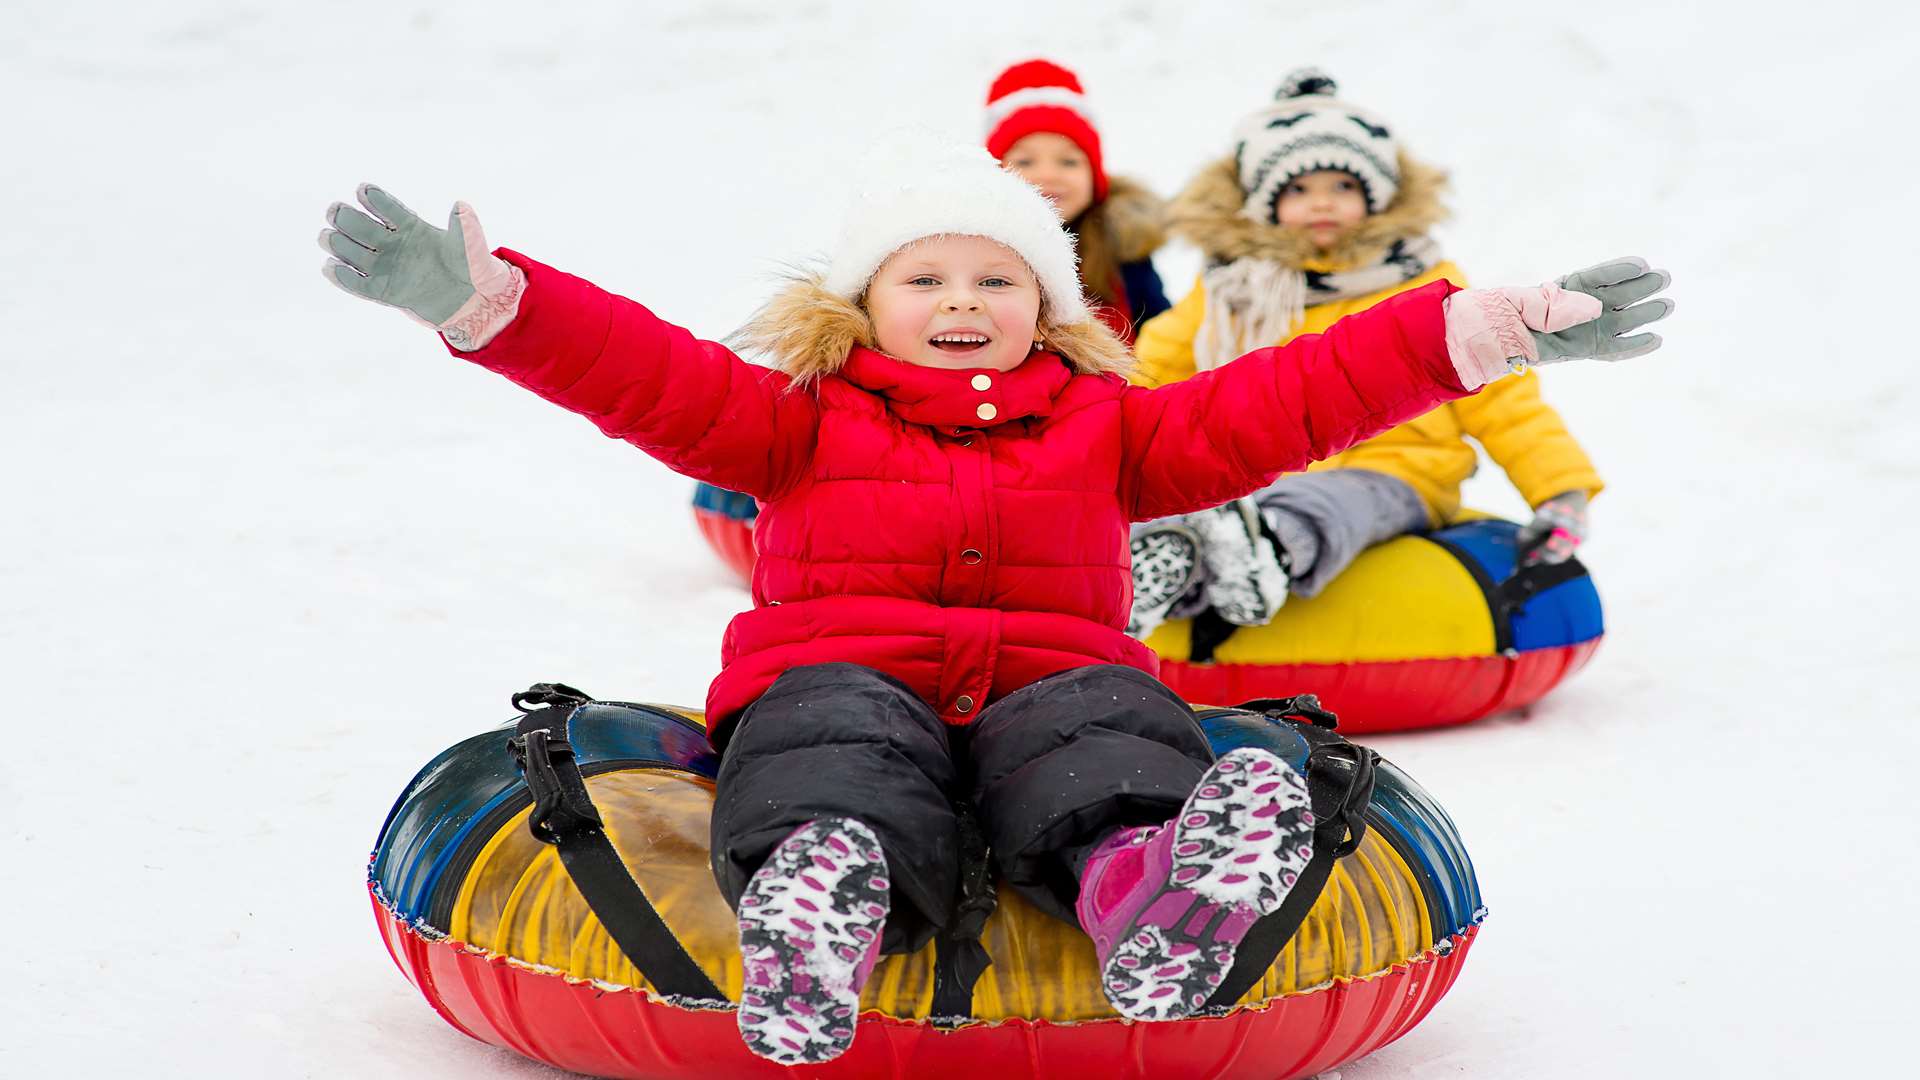 Snow tubing at Betteshanger this Christmas